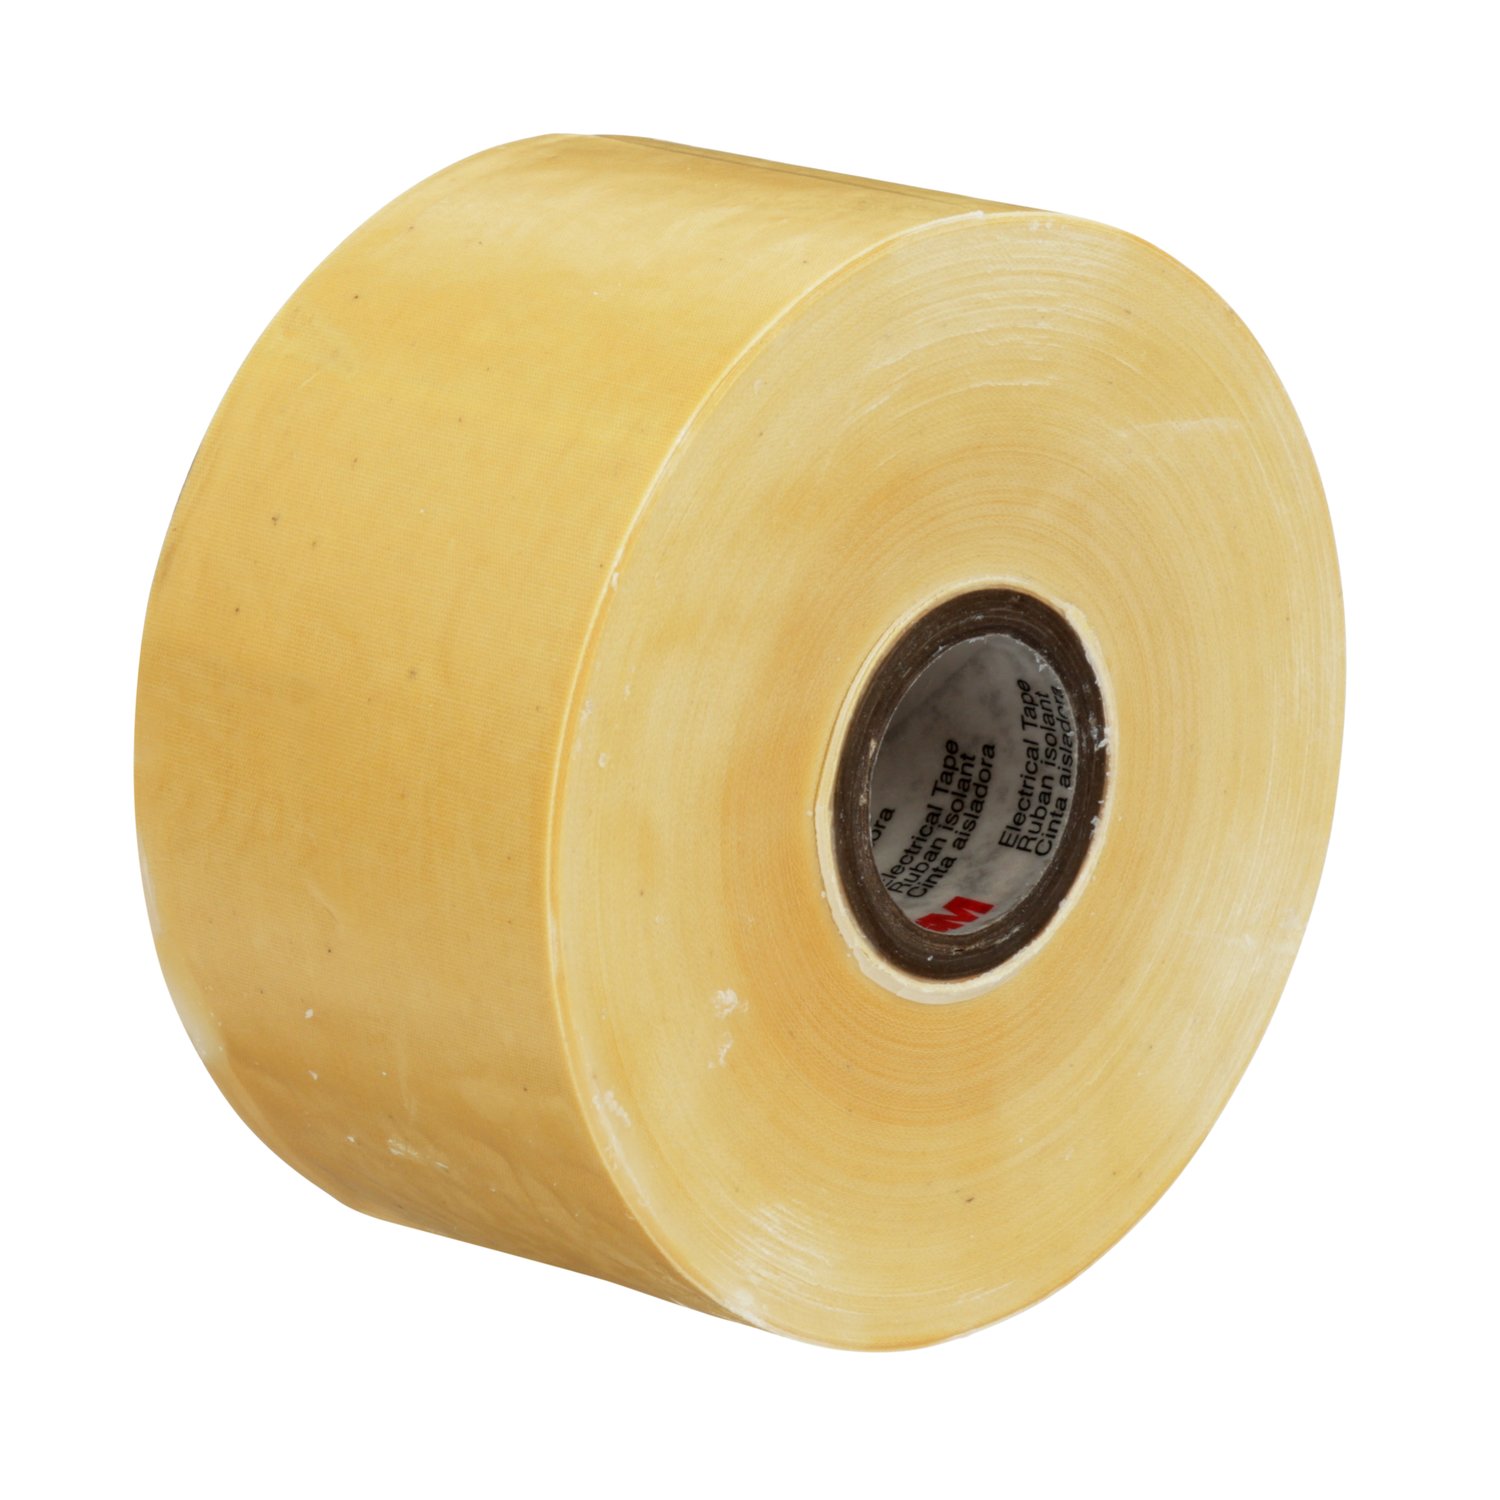 7000132188 - Scotch Varnished Cambric Tape 2510, 2 in x 36 yd, Yellow, 4
rolls/carton, 16 rolls/Case